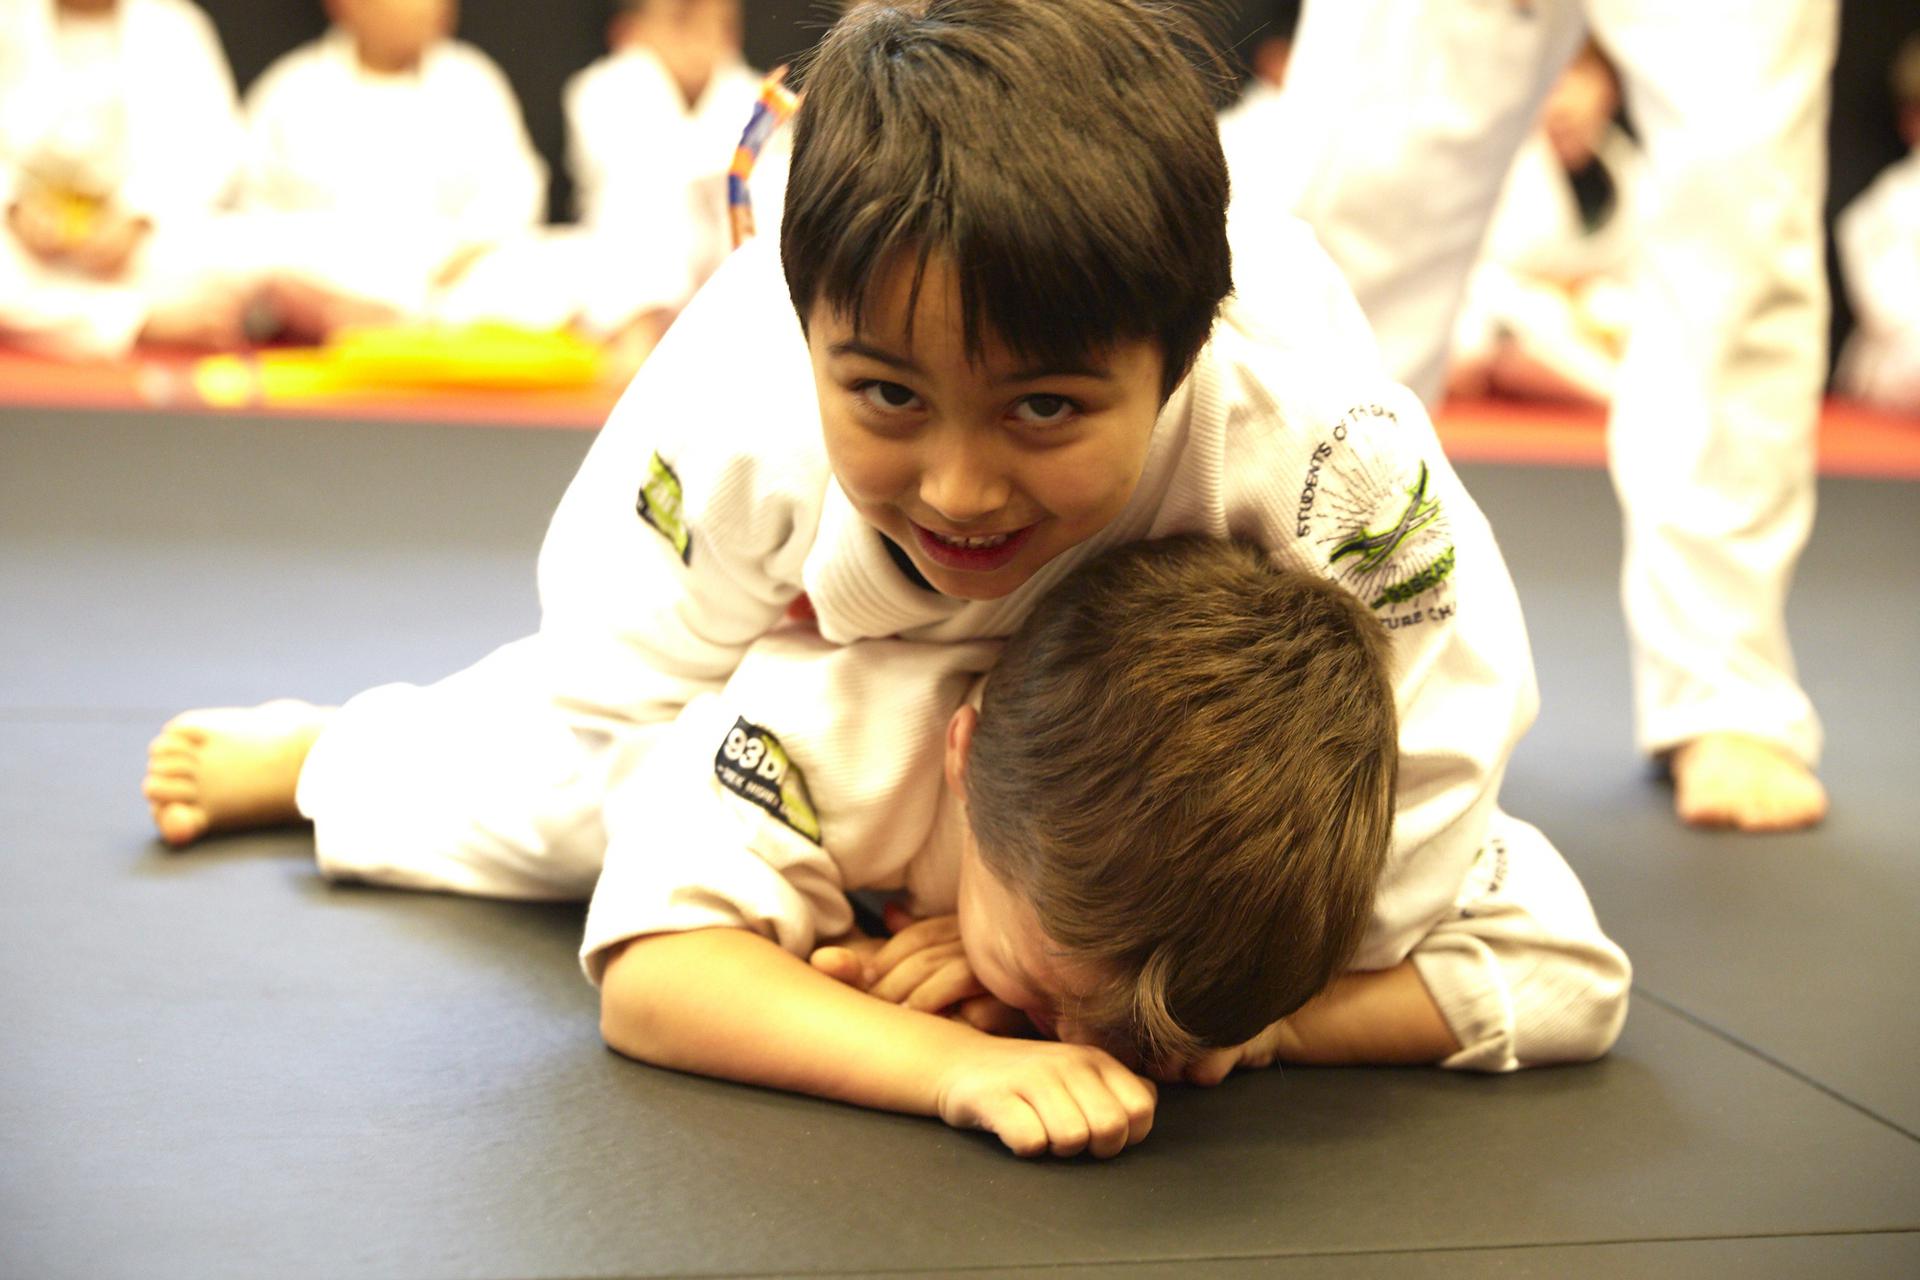 a boy smiling and feeling very confident with his performance in a brazilian jiu jitsu match at training grounds